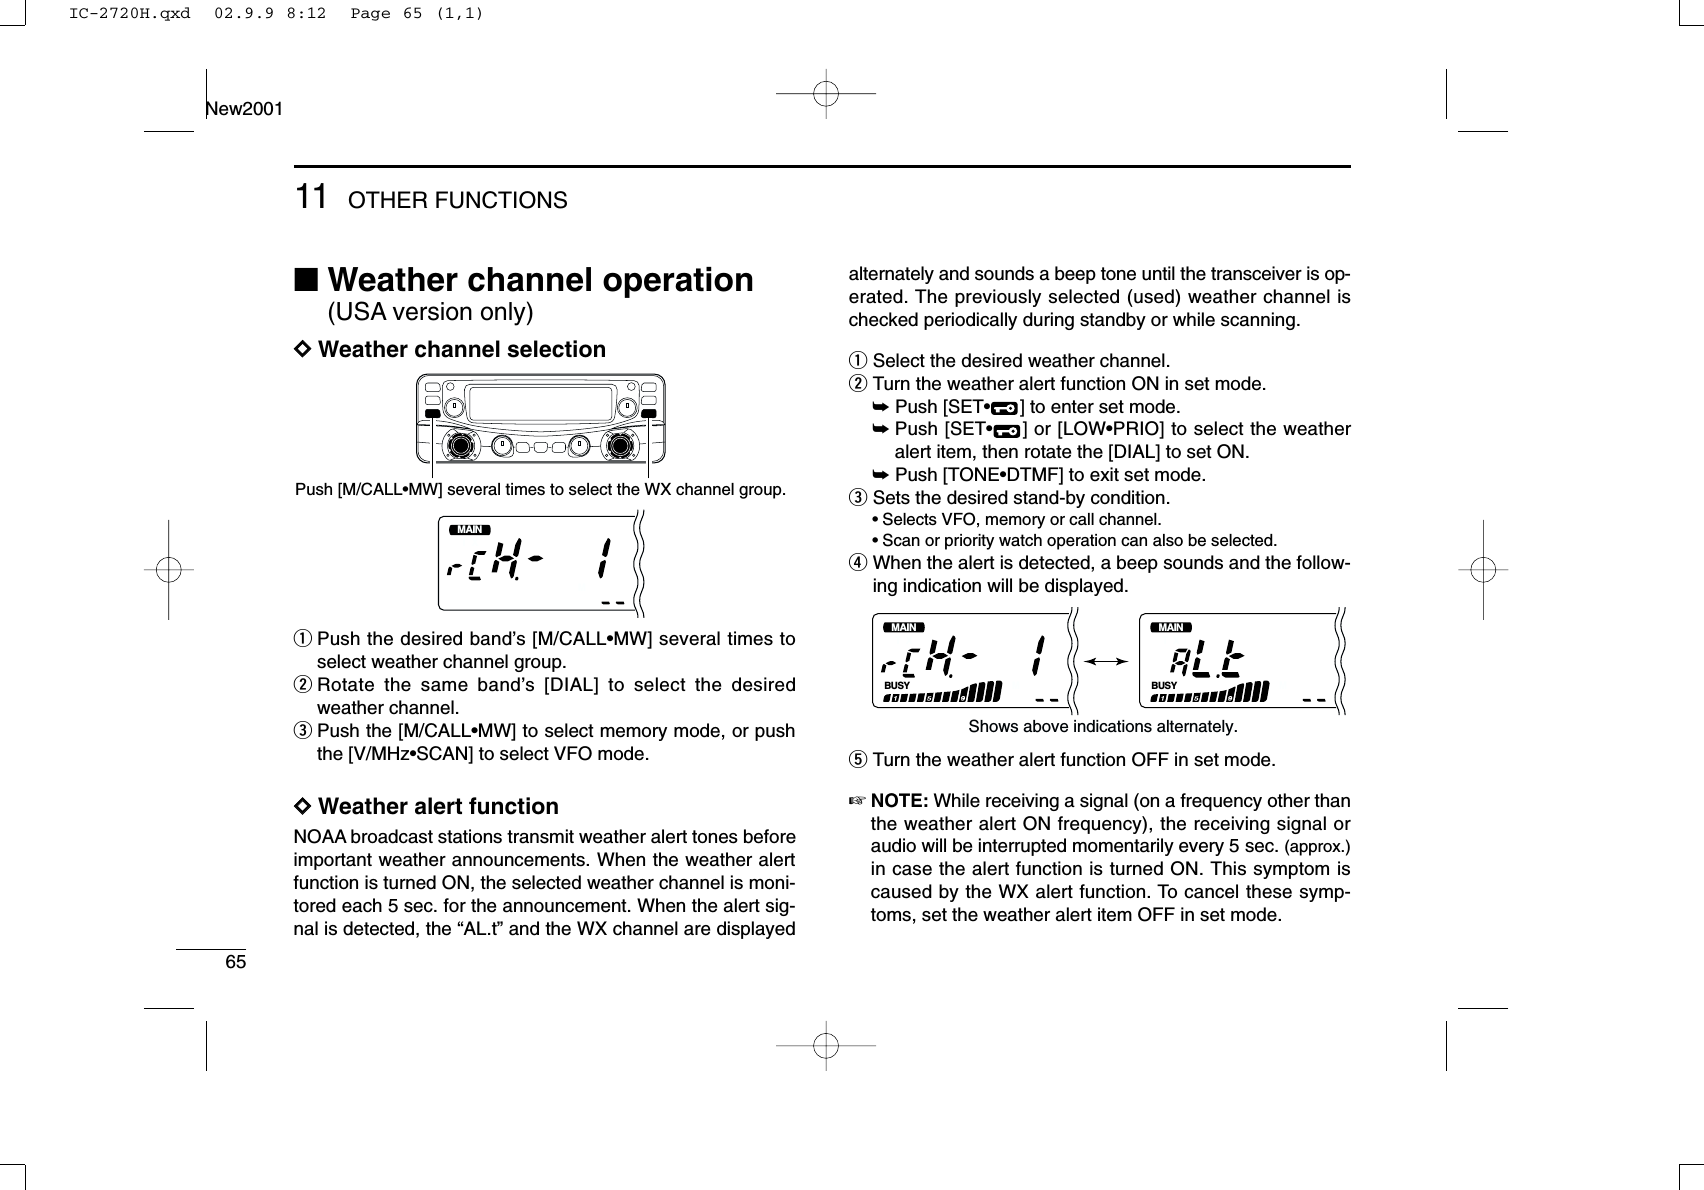 6511 OTHER FUNCTIONSNew2001■Weather channel operation(USA version only)DDWeather channel selectionqPush the desired band’s [M/CALL•MW] several times toselect weather channel group. wRotate the same band’s [DIAL] to select the desiredweather channel. ePush the [M/CALL•MW] to select memory mode, or pushthe [V/MHz•SCAN] to select VFO mode.DDWeather alert functionNOAA broadcast stations transmit weather alert tones beforeimportant weather announcements. When the weather alertfunction is turned ON, the selected weather channel is moni-tored each 5 sec. for the announcement. When the alert sig-nal is detected, the “AL.t” and the WX channel are displayedalternately and sounds a beep tone until the transceiver is op-erated. The previously selected (used) weather channel ischecked periodically during standby or while scanning.qSelect the desired weather channel.wTurn the weather alert function ON in set mode.➥Push [SET•] to enter set mode.➥Push [SET•] or [LOW•PRIO] to select the weatheralert item, then rotate the [DIAL] to set ON.➥Push [TONE•DTMF] to exit set mode.eSets the desired stand-by condition.•Selects VFO, memory or call channel.•Scan or priority watch operation can also be selected.rWhen the alert is detected, a beep sounds and the follow-ing indication will be displayed.tTurn the weather alert function OFF in set mode.☞NOTE: While receiving a signal (on a frequency other thanthe weather alert ON frequency), the receiving signal oraudio will be interrupted momentarily every 5 sec. (approx.)in case the alert function is turned ON. This symptom iscaused by the WX alert function. To cancel these symp-toms, set the weather alert item OFF in set mode.BUSYMAINT  XMBUSYMAINT  XMShows above indications alternately.MAINT  XMPush [M/CALL•MW] several times to select the WX channel group.IC-2720H.qxd  02.9.9 8:12  Page 65 (1,1)